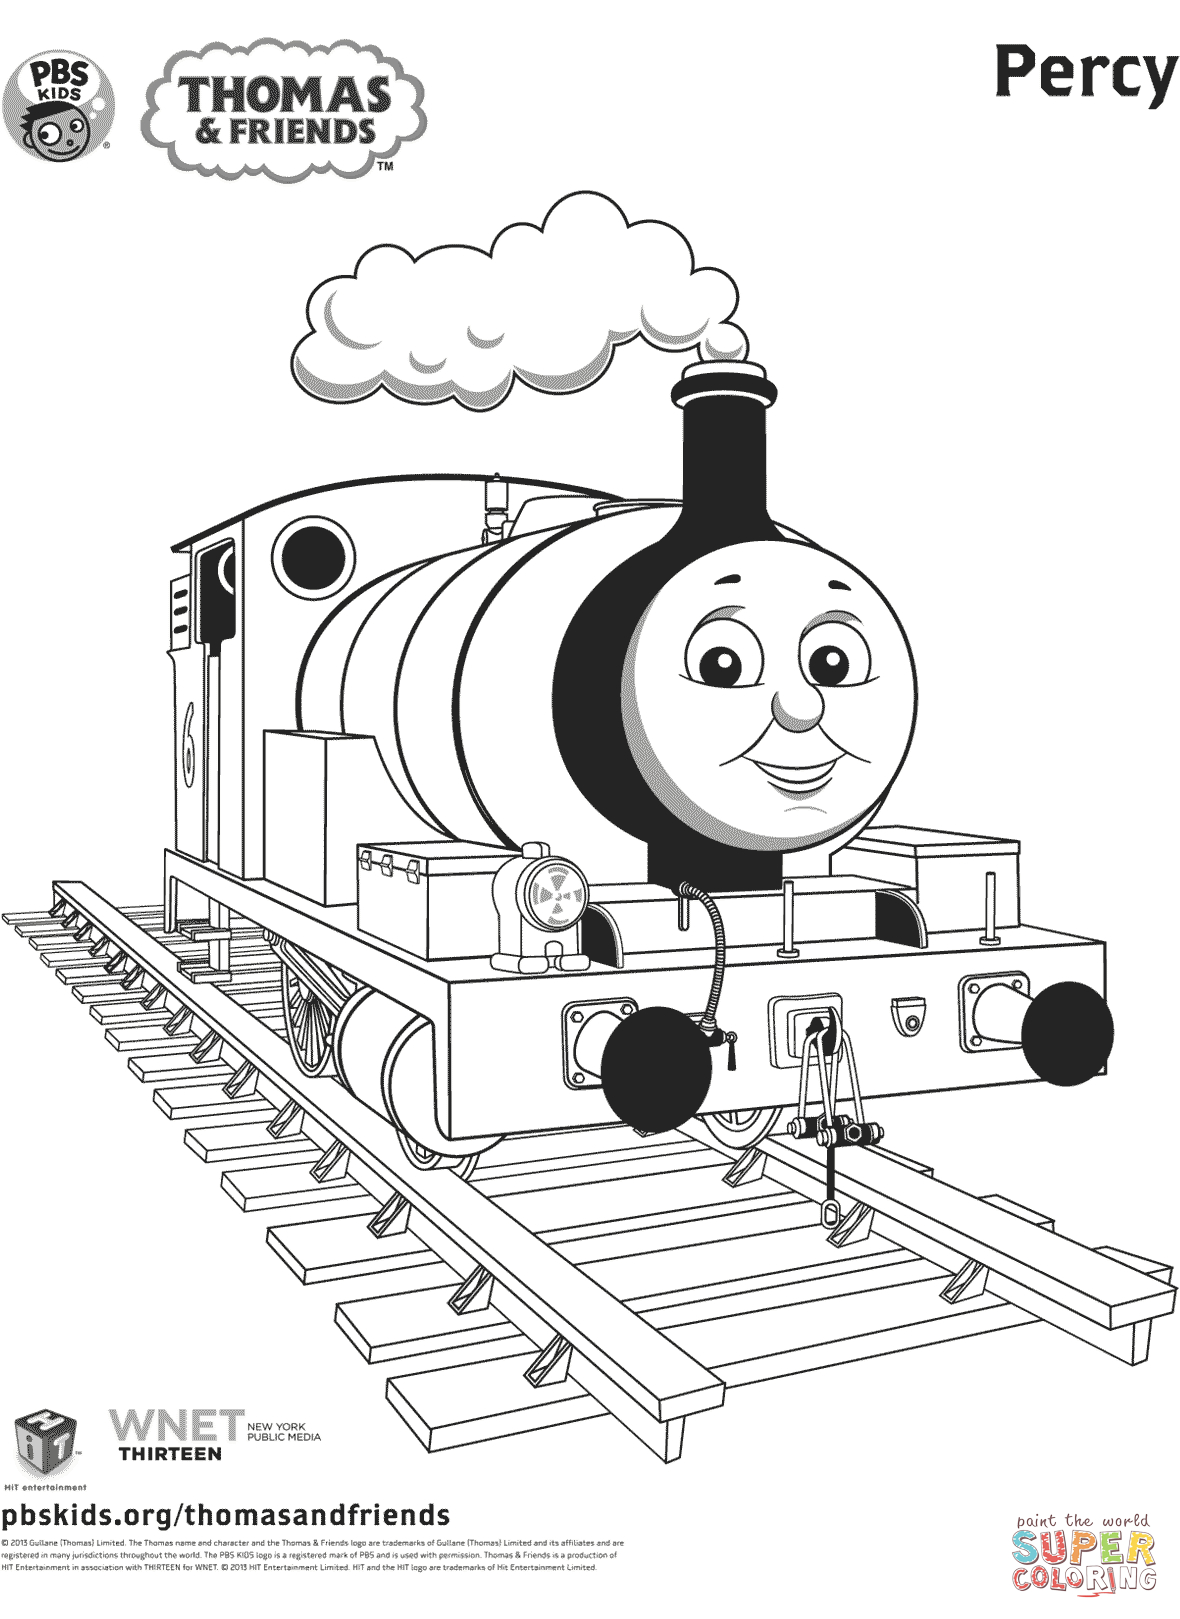 Thomas Coloring Pages Printable Percy From Thomas Friends Coloring Page Free Printable Coloring